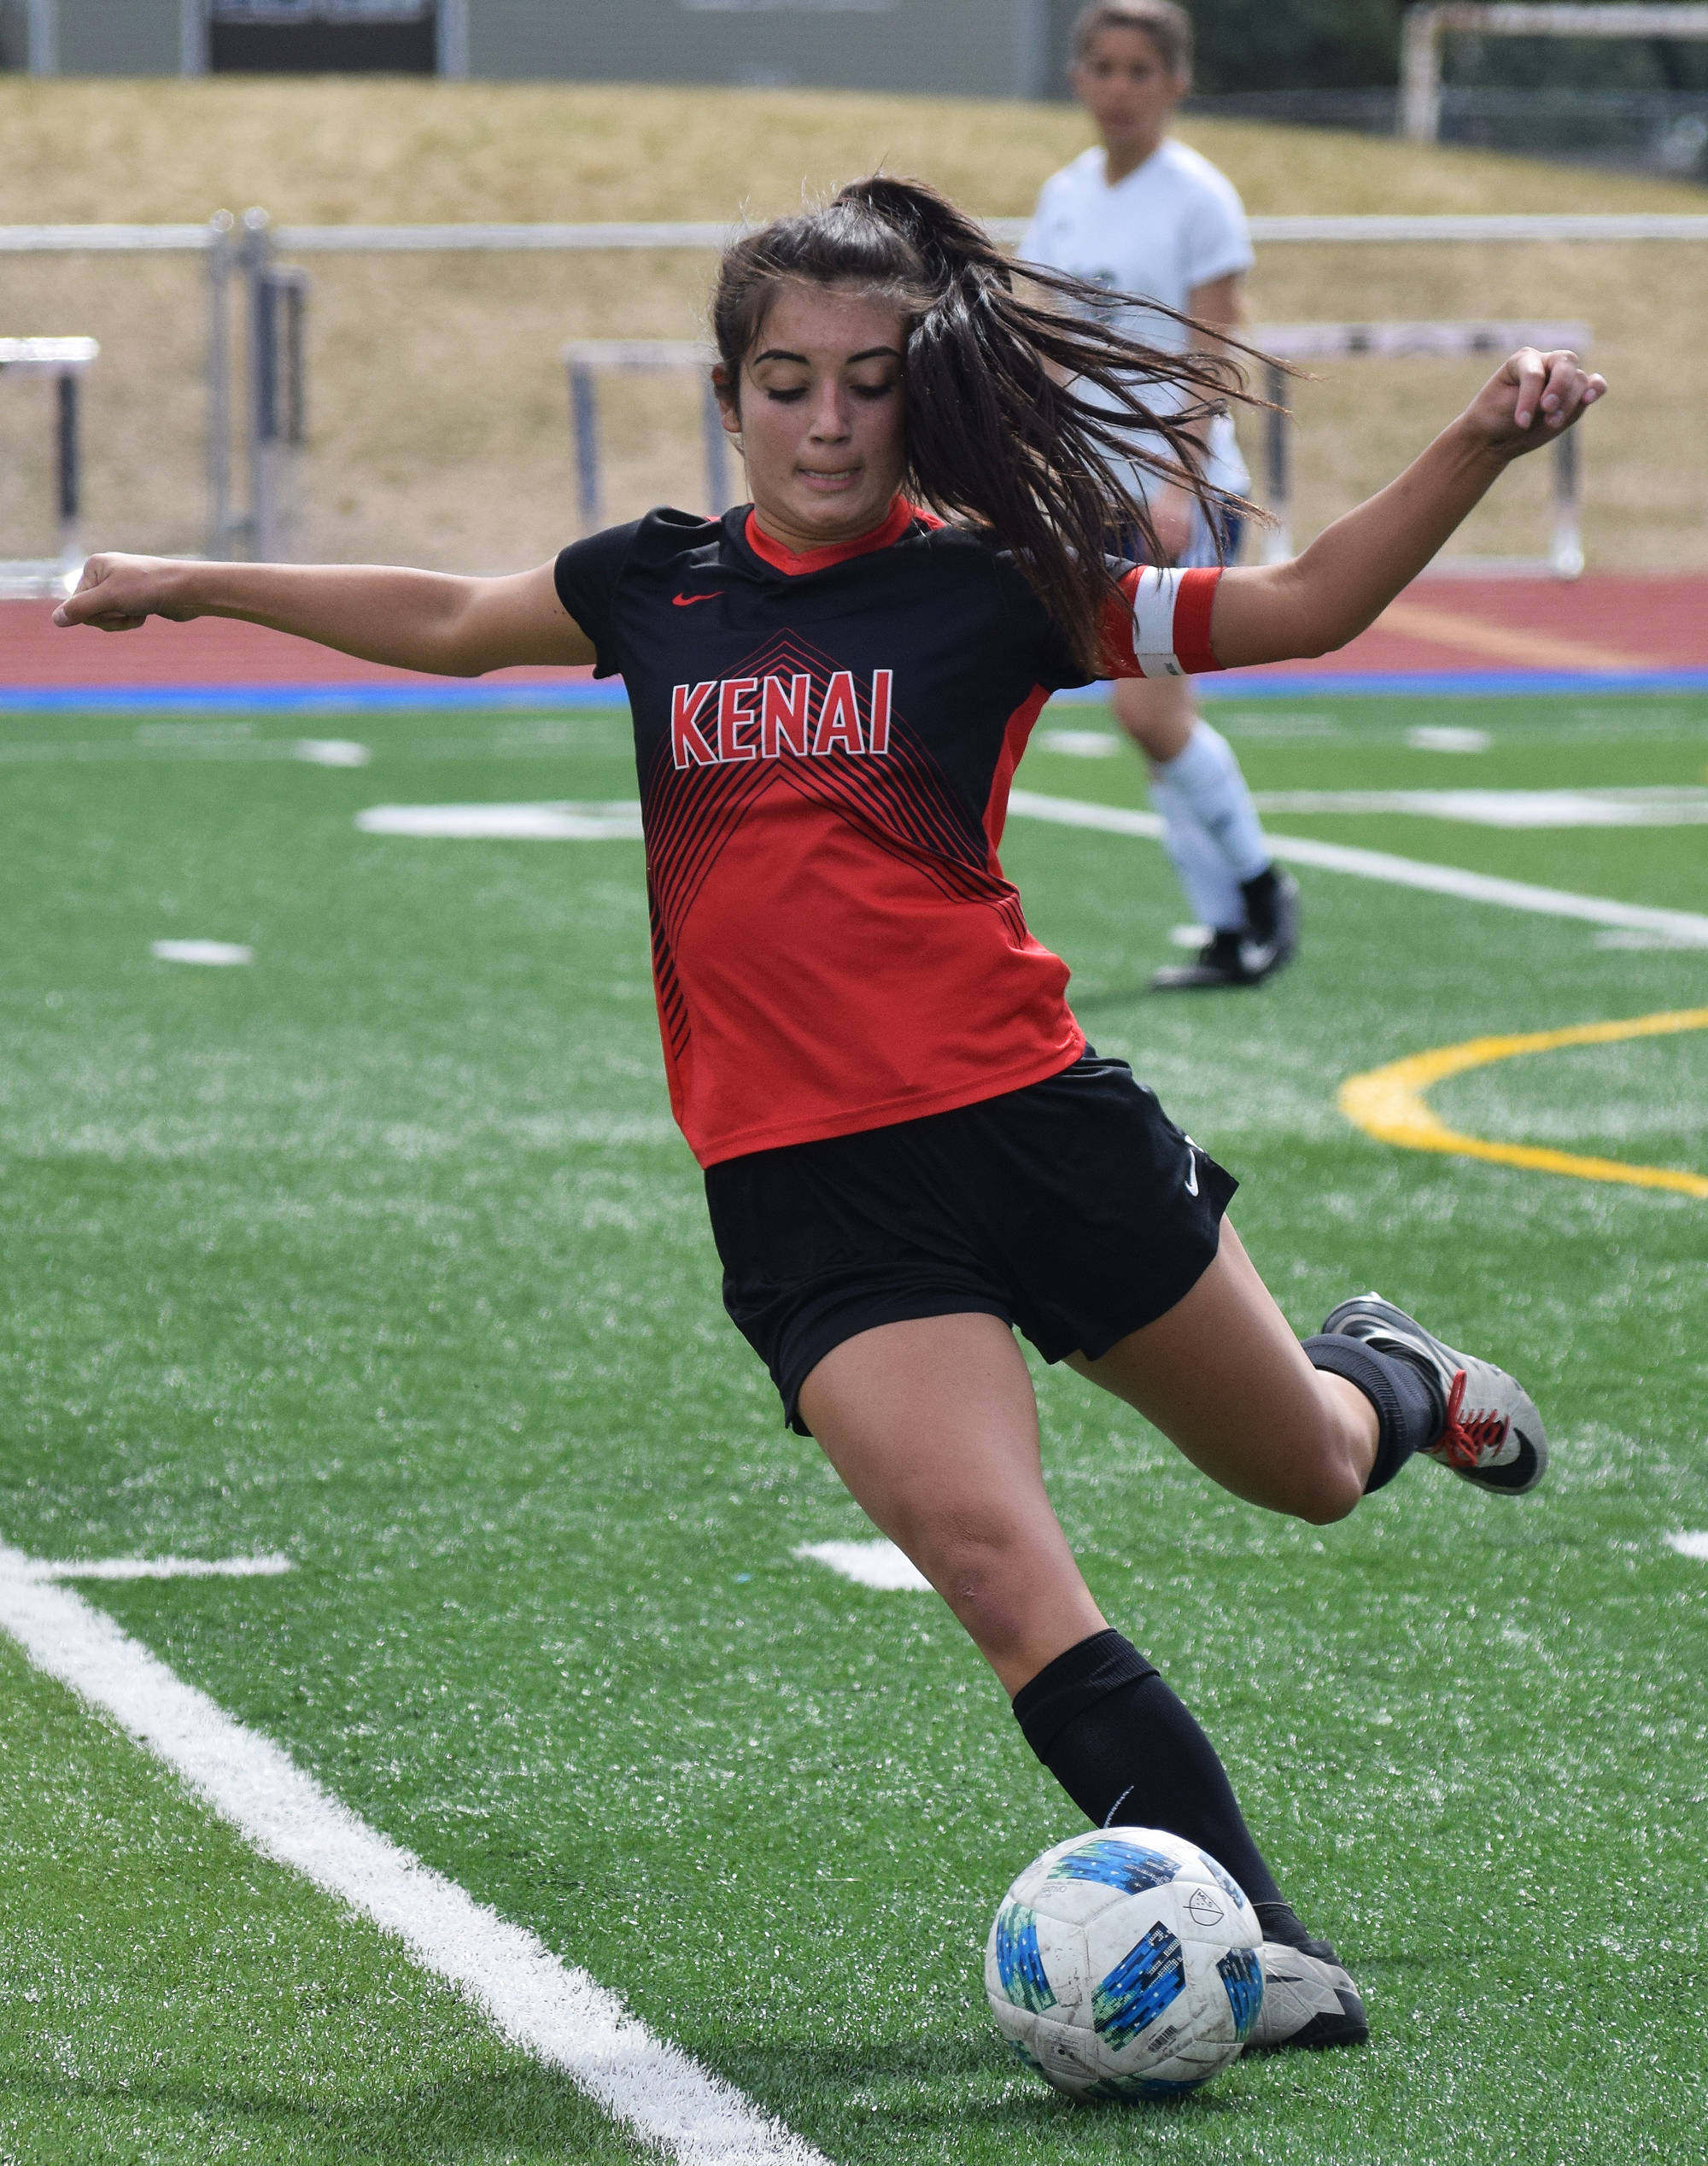 Kenai Central’s Brenna Eubank winds up for a kick May 19, 2018, in the Peninsula Conference girls soccer championship at Soldotna High School. (Photo by Joey Klecka/Peninsula Clarion)